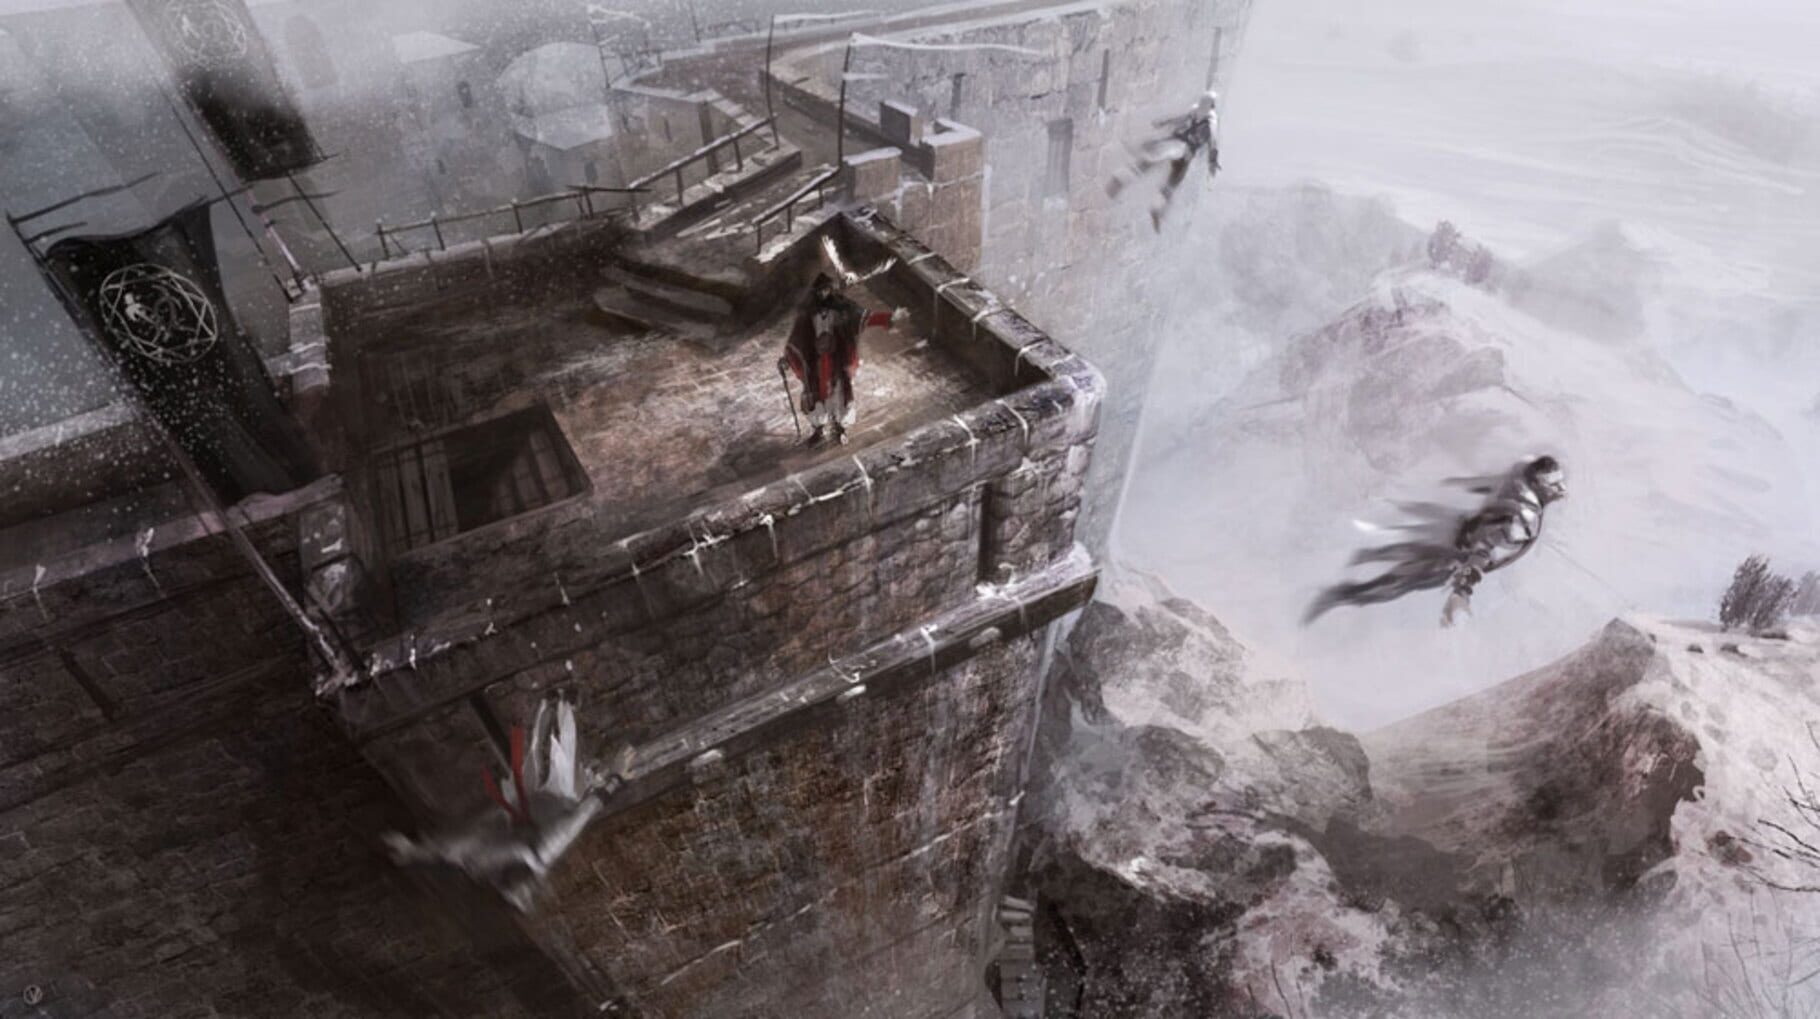 Assassin's Creed Image